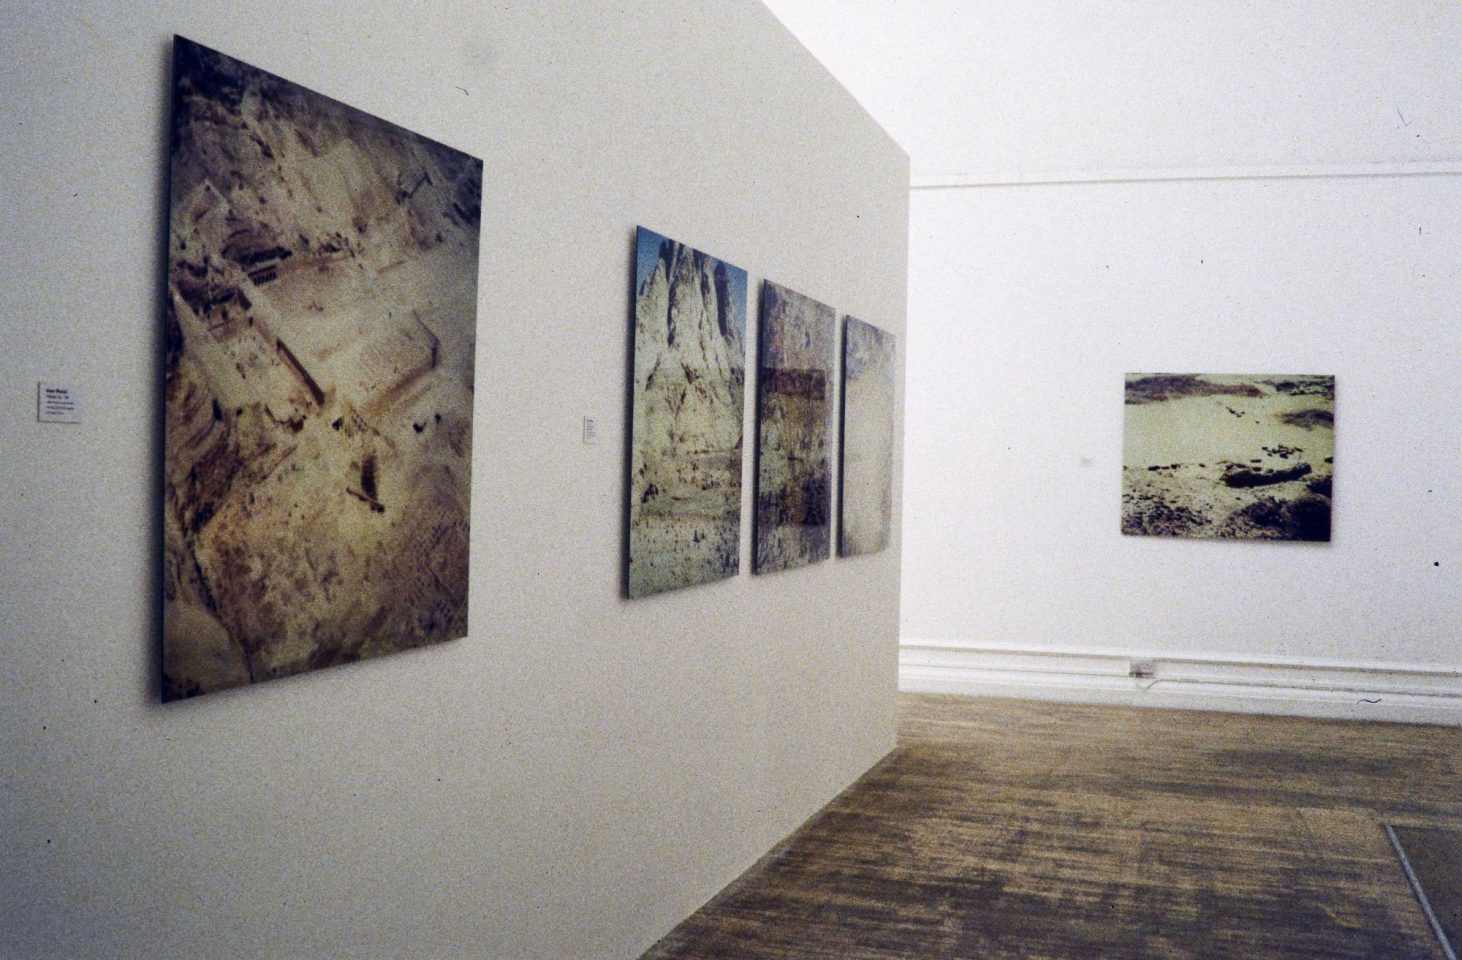 Installation view from 1997 exhibition Desert, featuring works by Hannah Collins, Knut Maron, Sophie Ristelhueber, Michael Rovner, Thomas Ruff, Frederick Sommer, Bill Viola, Verdi Yahooda. Curated by Jim Harold.
